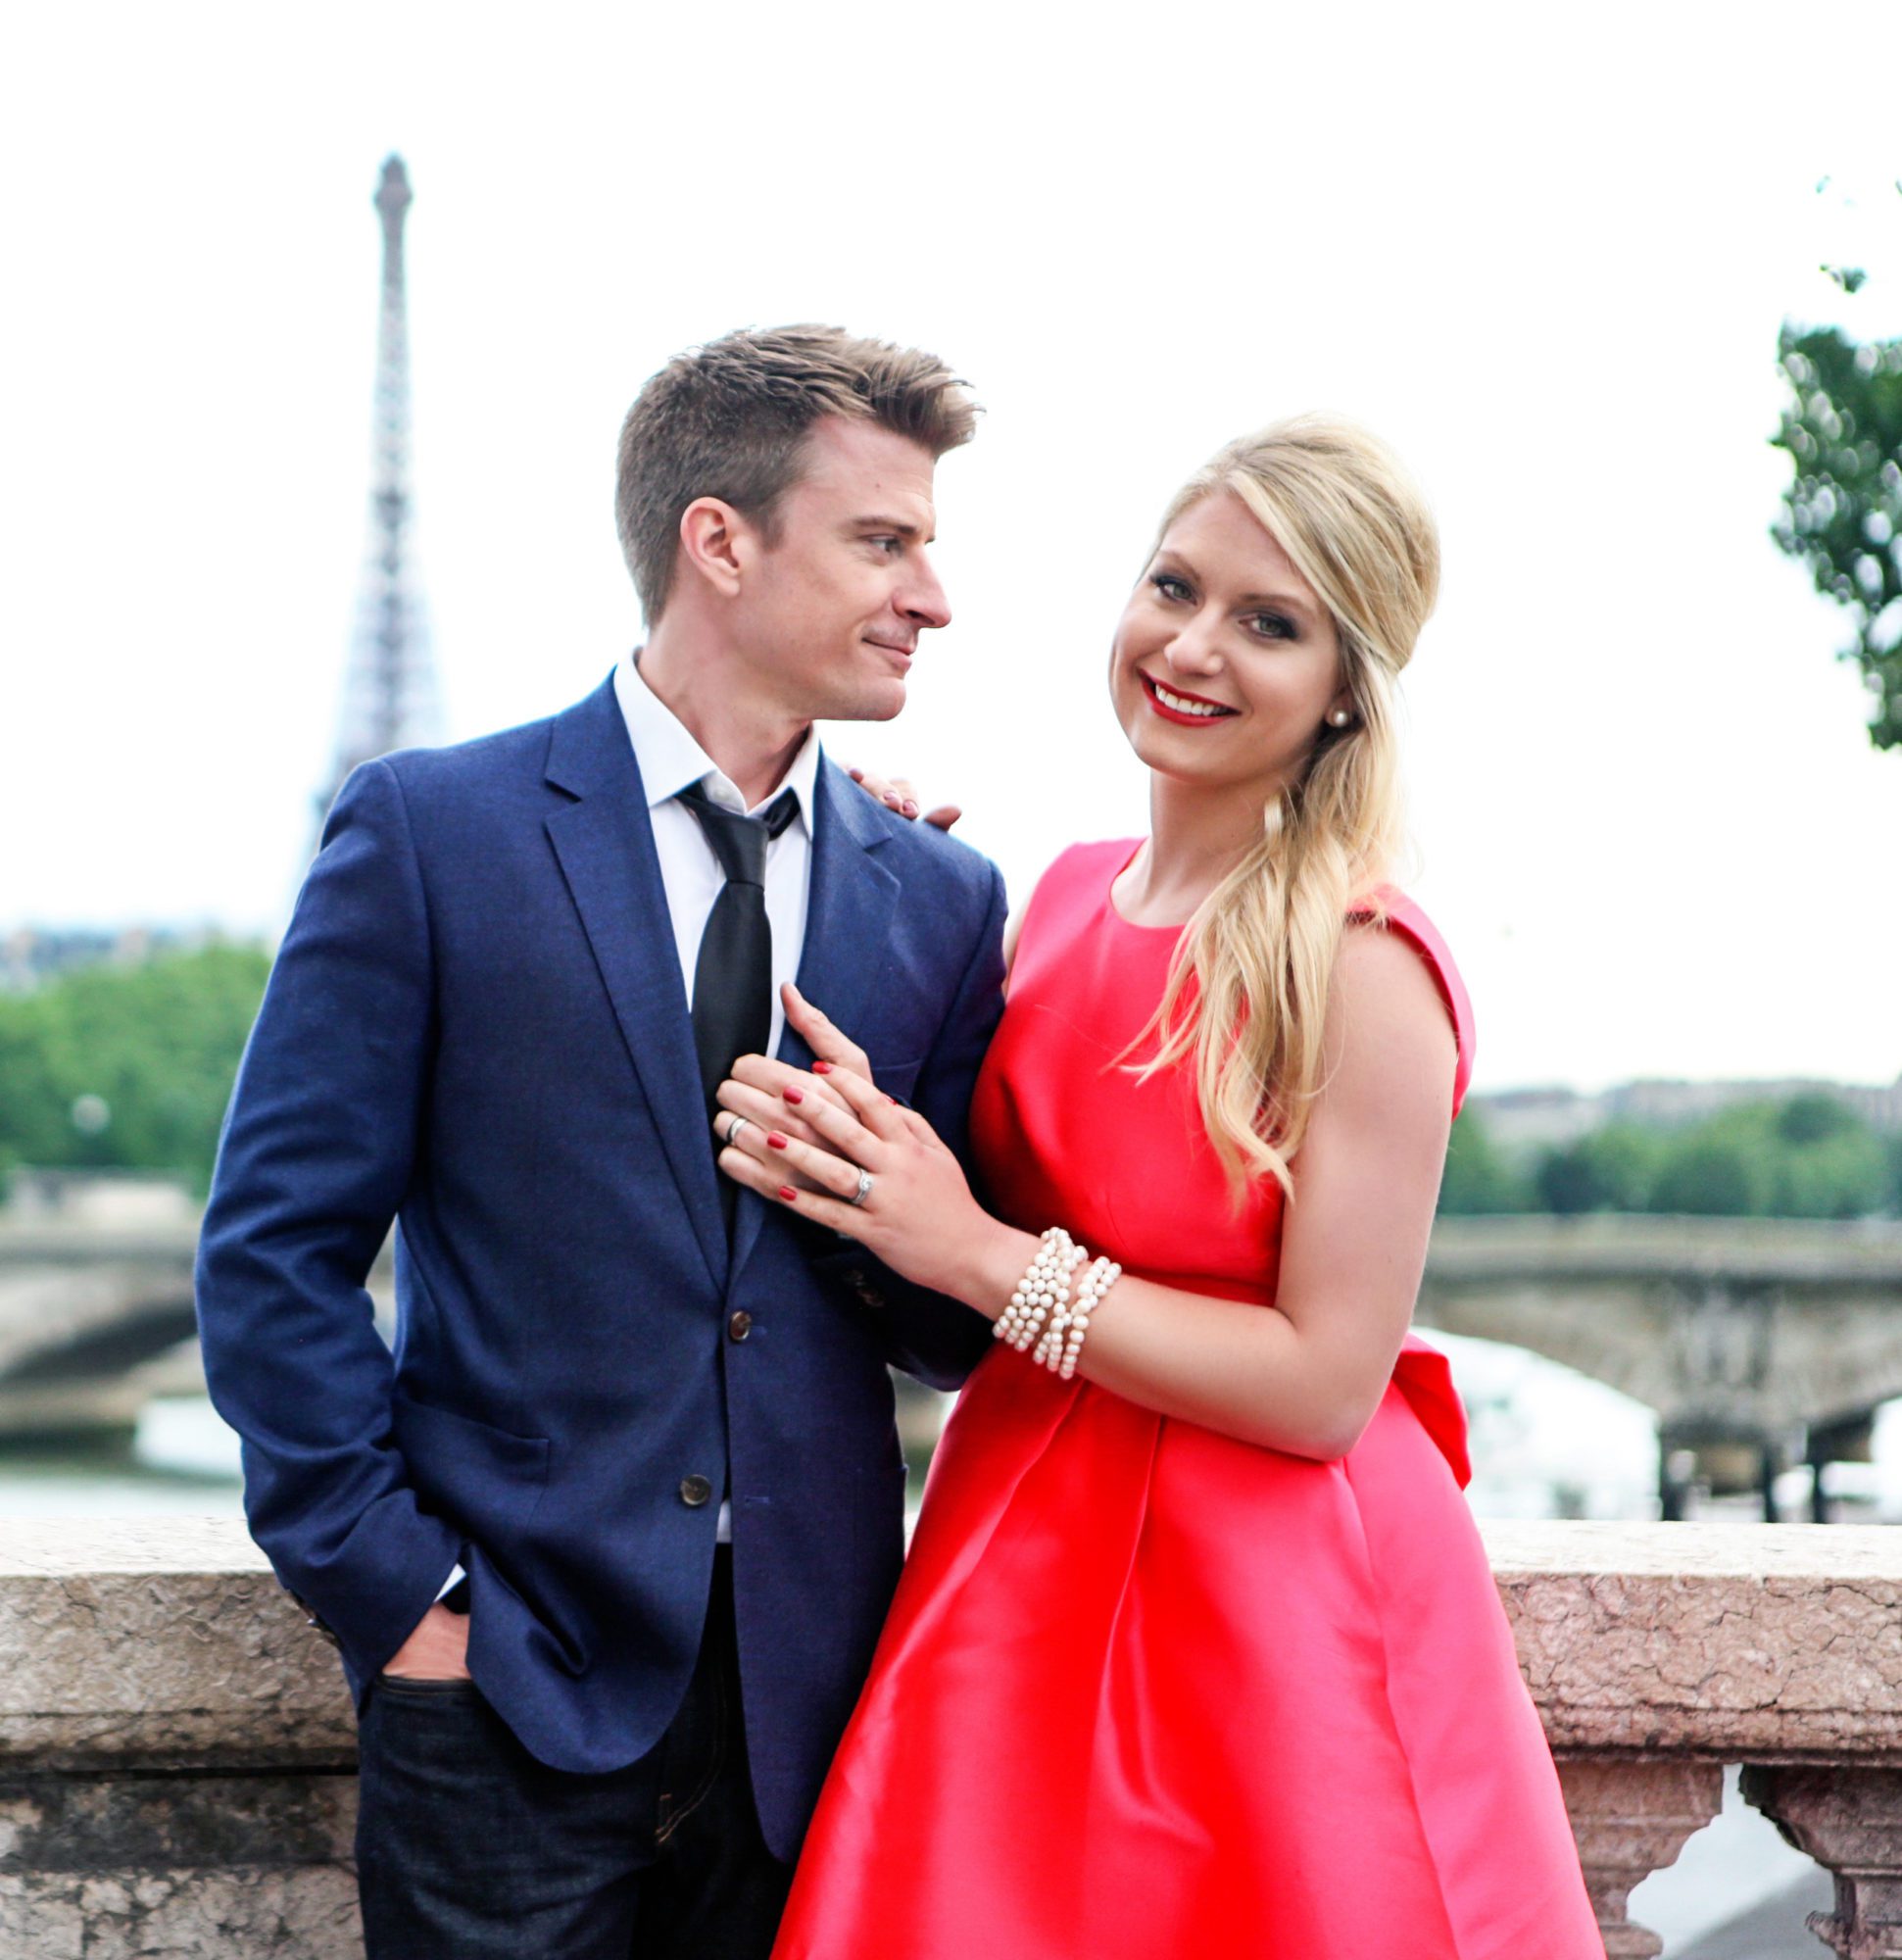 Emily and James Williams on a Balcony in Paris